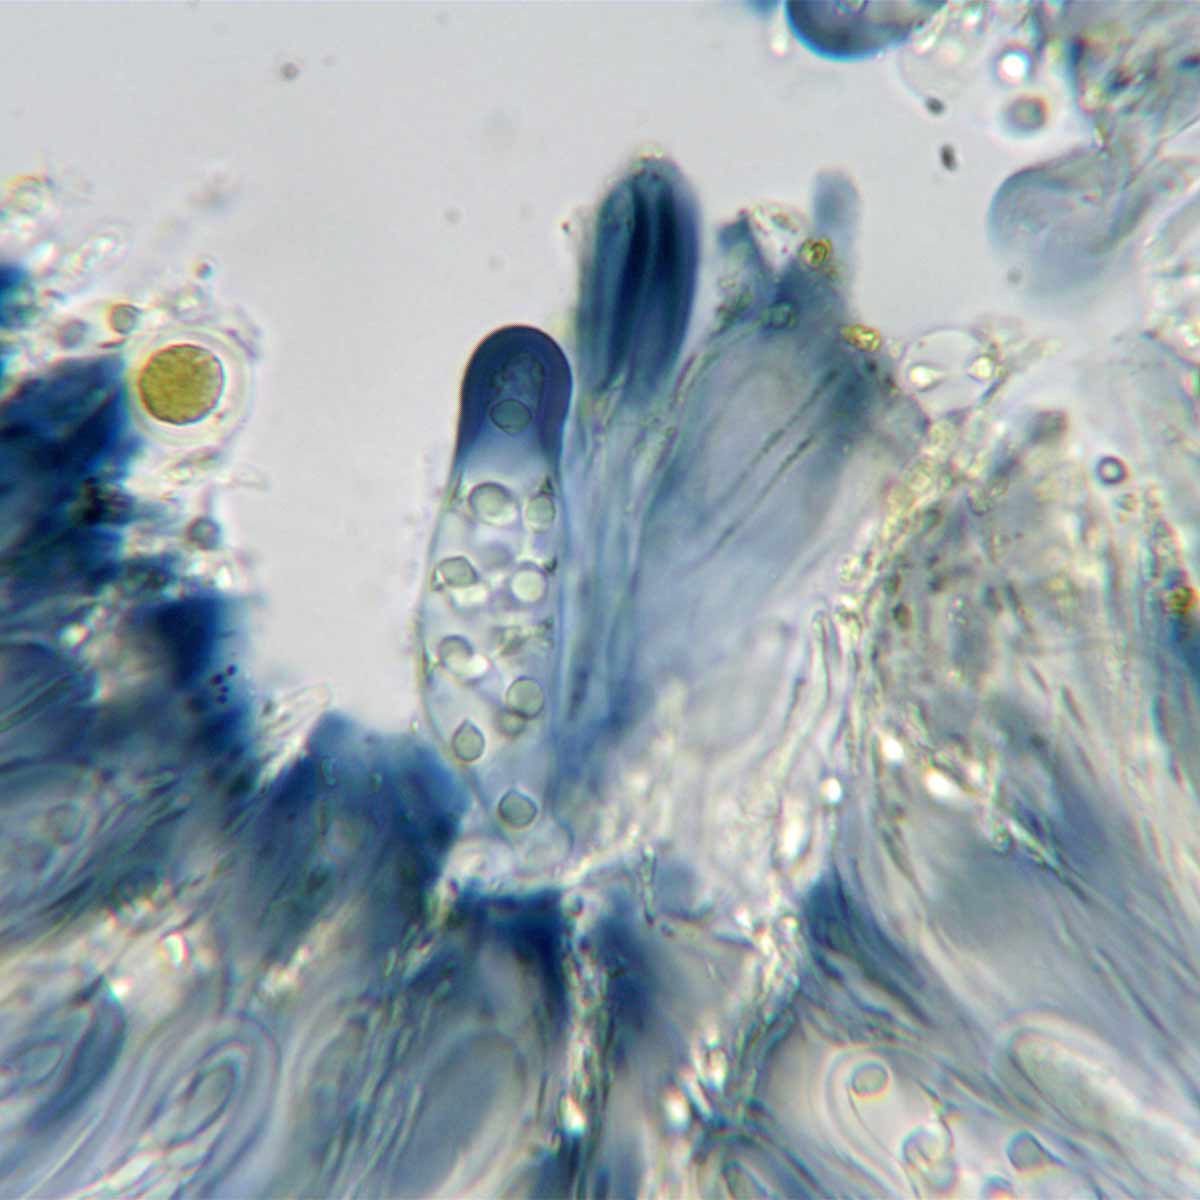 Now I have flushed with acetic acid and then added dilute Lugol's iodine solution. The starchy (amyloid) parts of the ascus tip have stained blue.